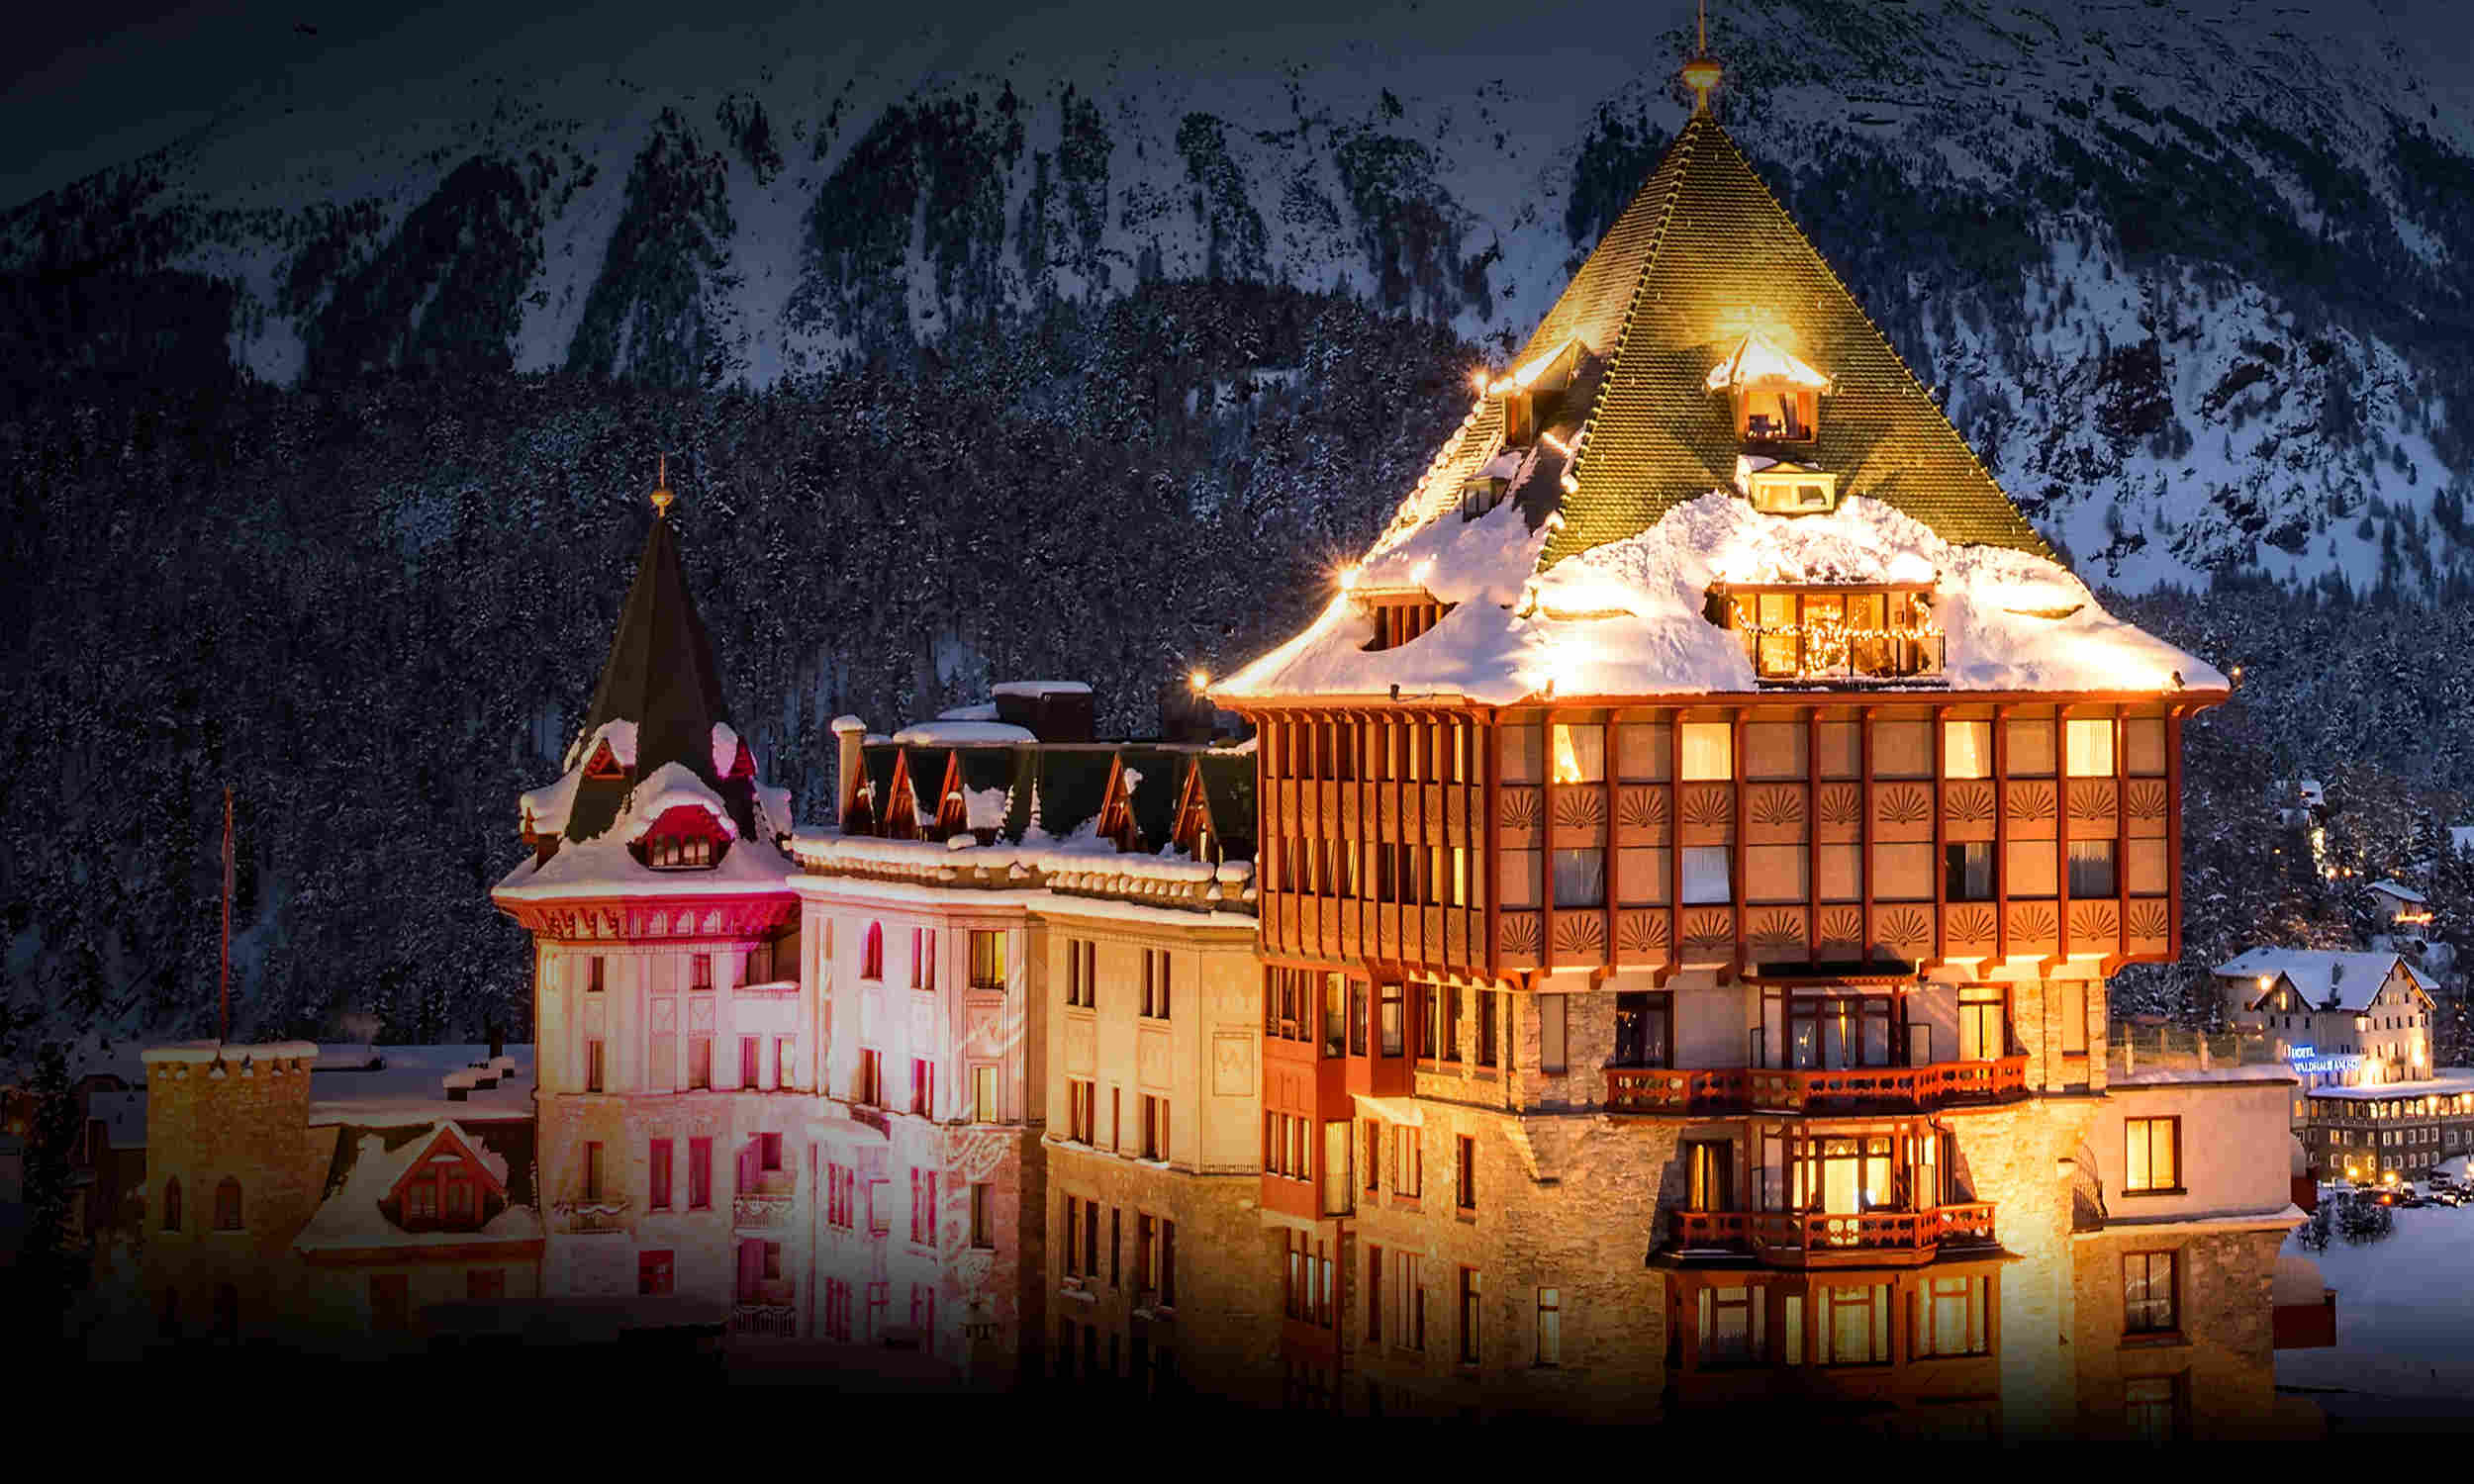 Luxury Badrutt’s Palace Hotel in the mountains